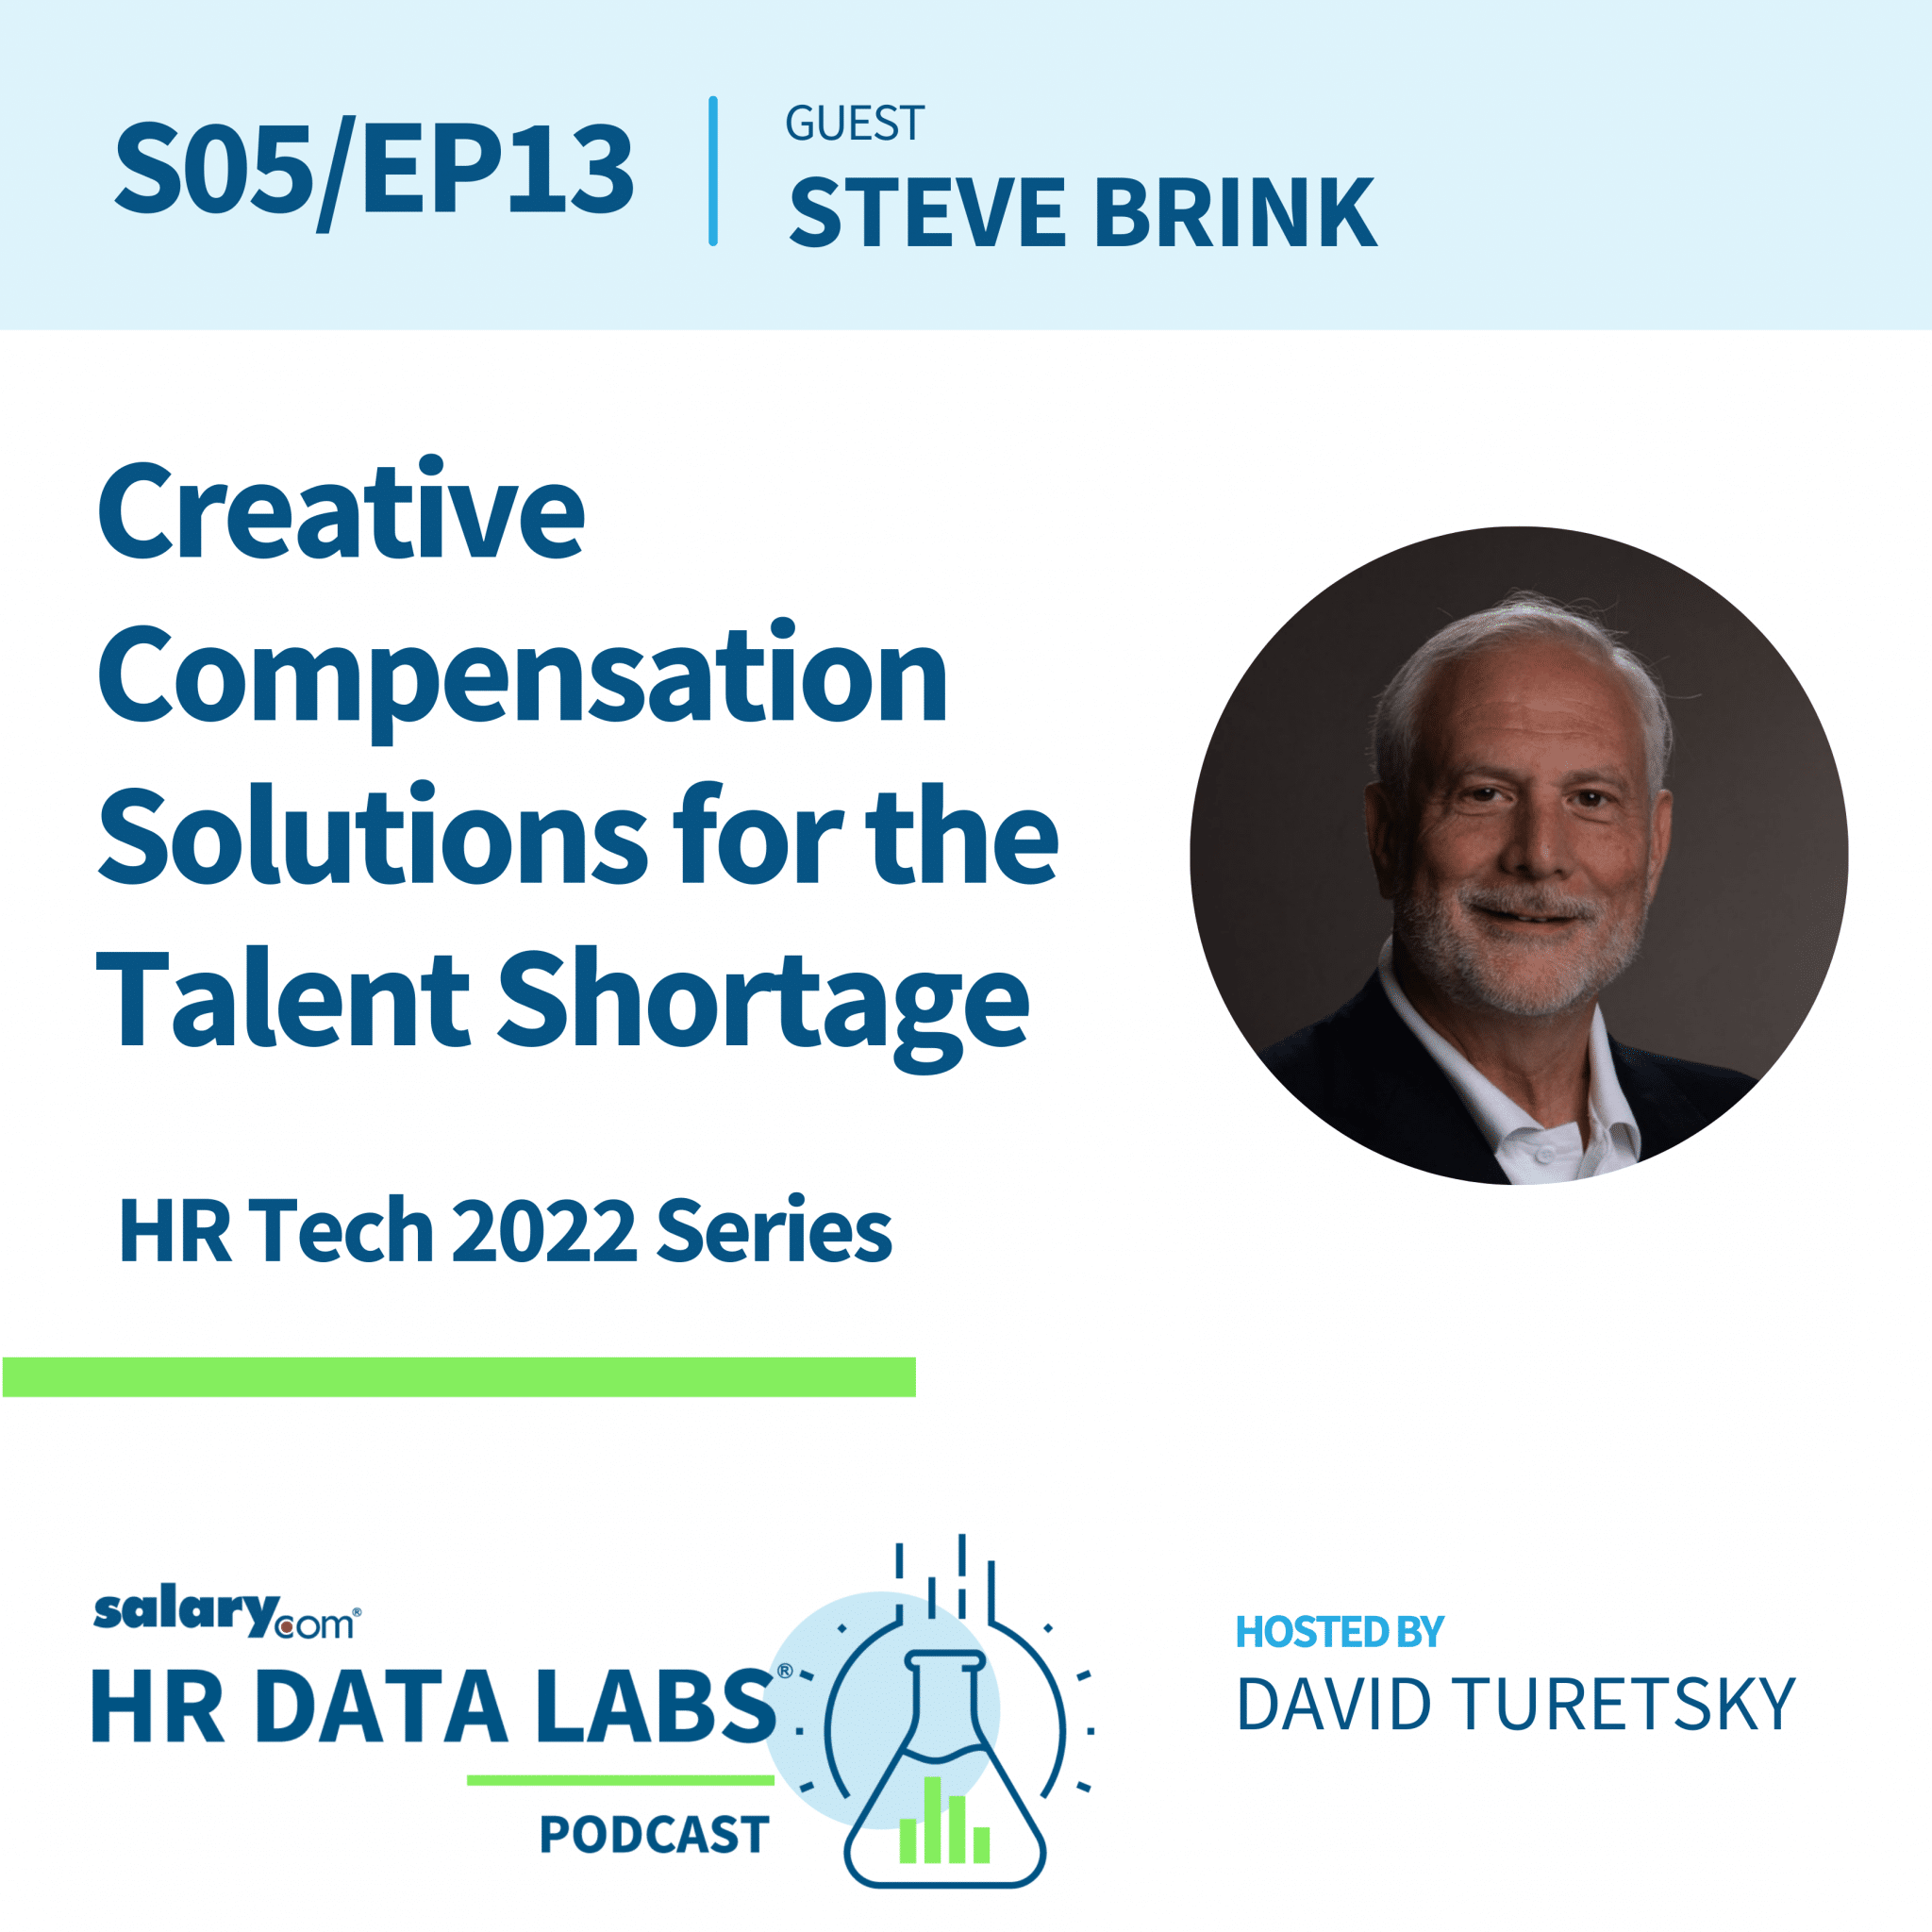 Steve Brink – HR Tech 2022 Series – Creative Compensation Solutions for the Talent Shortage